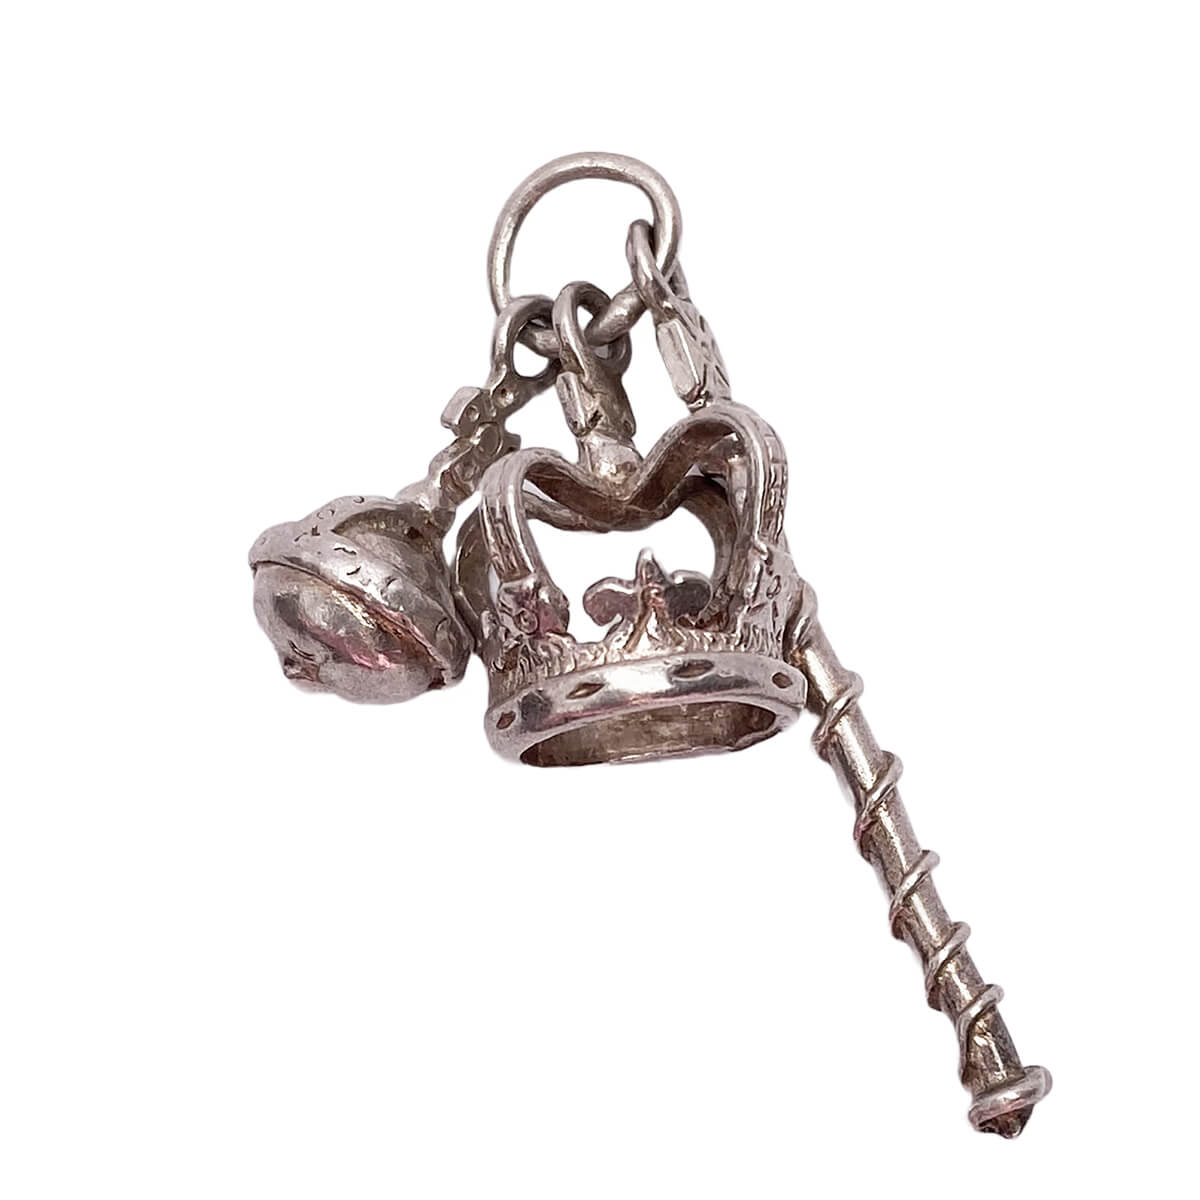 Vintage Crown Orb and Sceptre charm silver pendant from Charmarama